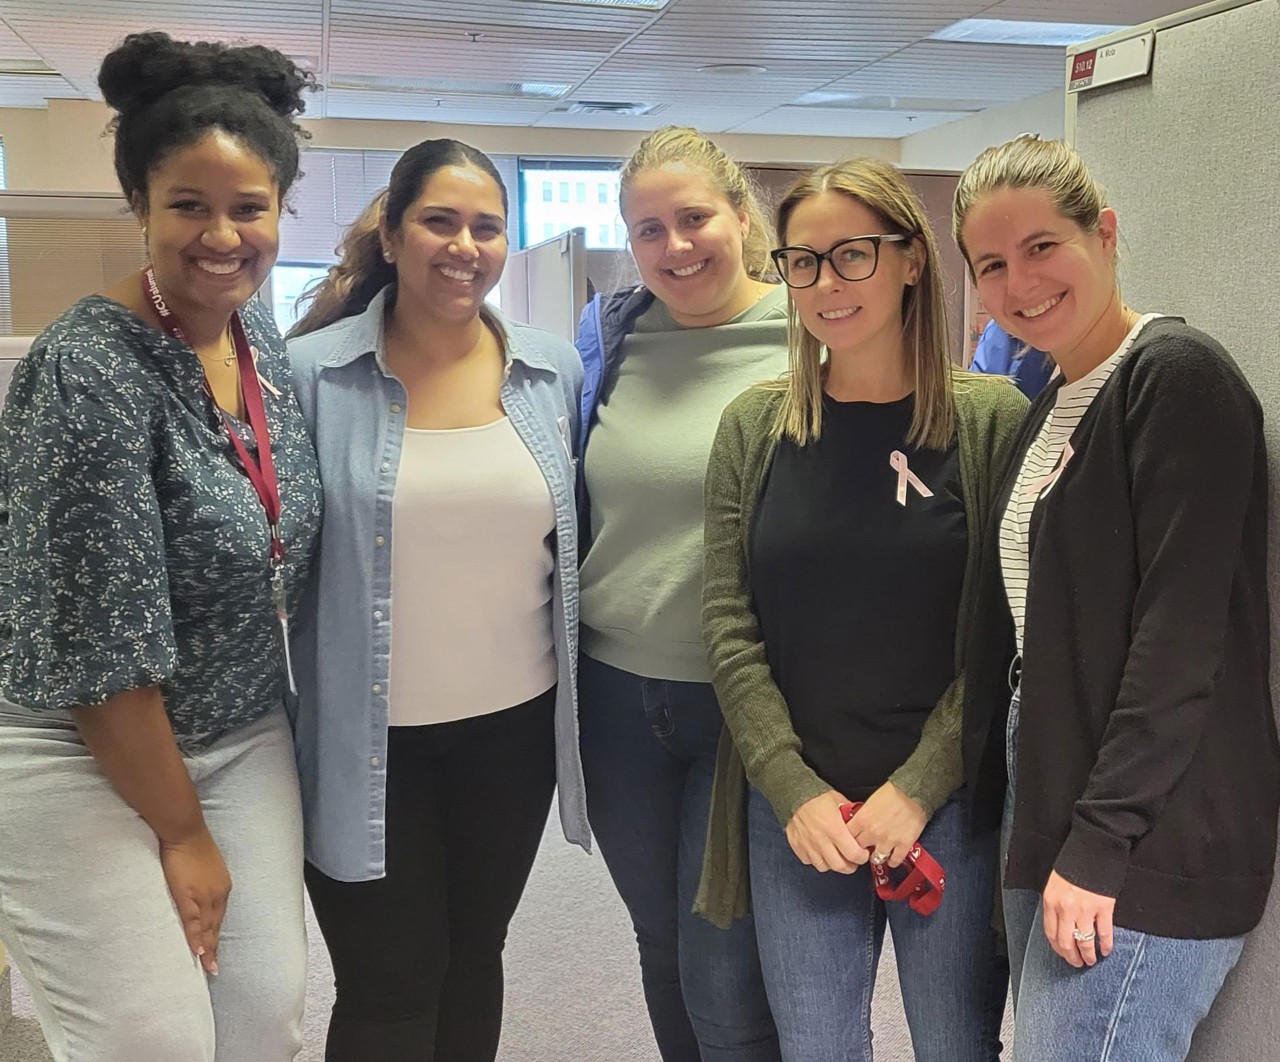 Alumni Engagement employees wearing pink ribbons and denim jeans